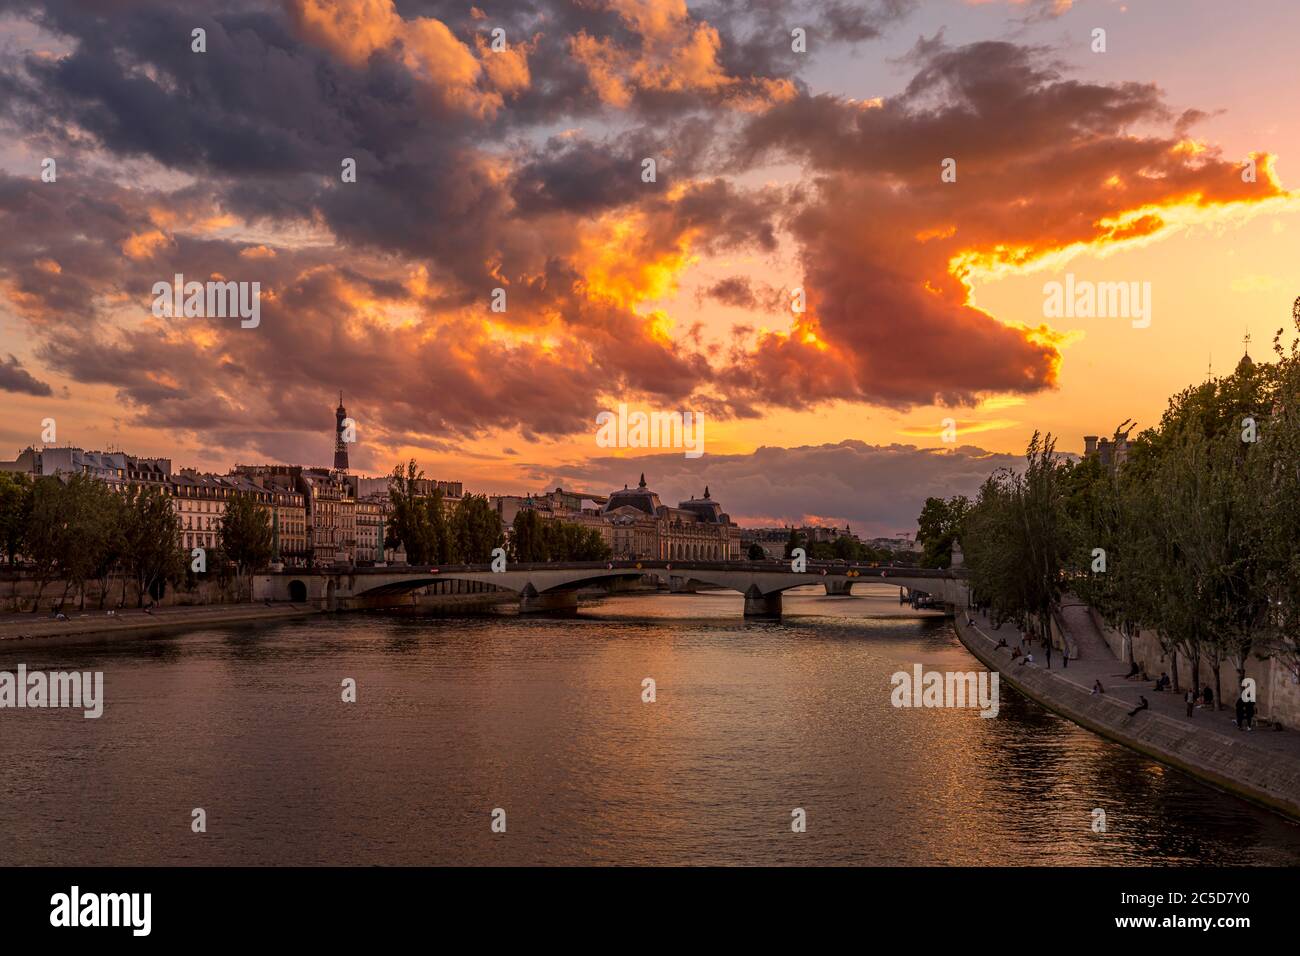 Paris, France - June 28, 2020: Nice view of Seine river, bridge and Eiffel tower in background at sunset in Paris. Viewed from Pont des Arts Stock Photo